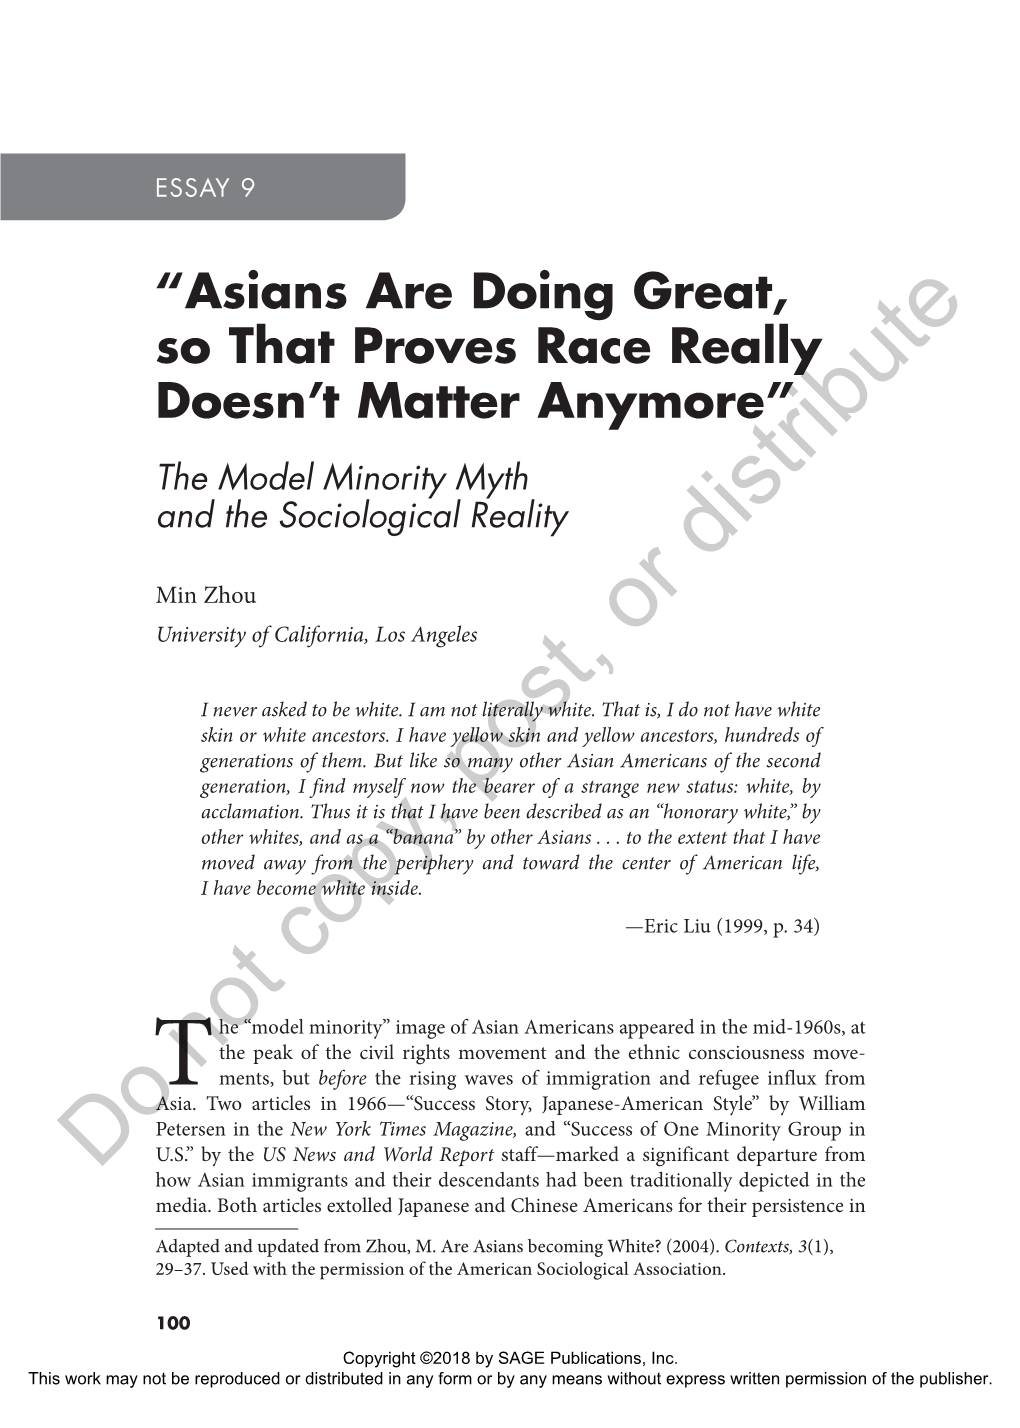 “Asians Are Doing Great, So That Proves Race Really Doesn't Matter